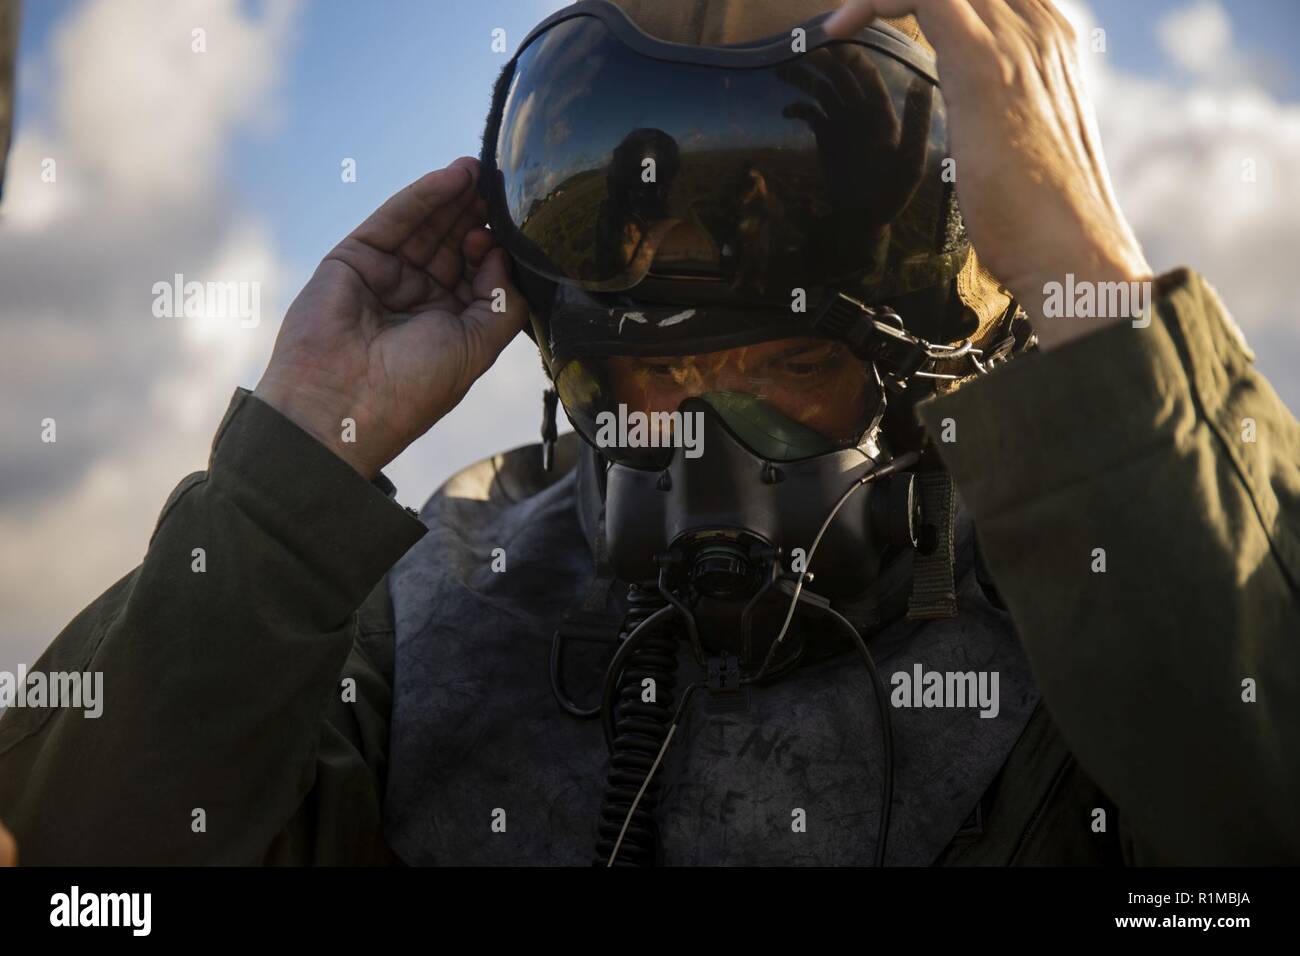 U.S. Marine Corps Gunnery Sgt. Todd Bauer, a crew chief with Marine Heavy Helicopter Squadron 463, Marine Aircraft Group 24, dawns his gas mask during Chemical, Biological, Radiological, Nuclear Environment (CBRNE) helicopter support training, Marine Corps Air Station Kaneohe Bay, Oct. 22, 2018. The CBRN operations are conducted to aid in producing readiness within the squadron. Stock Photo